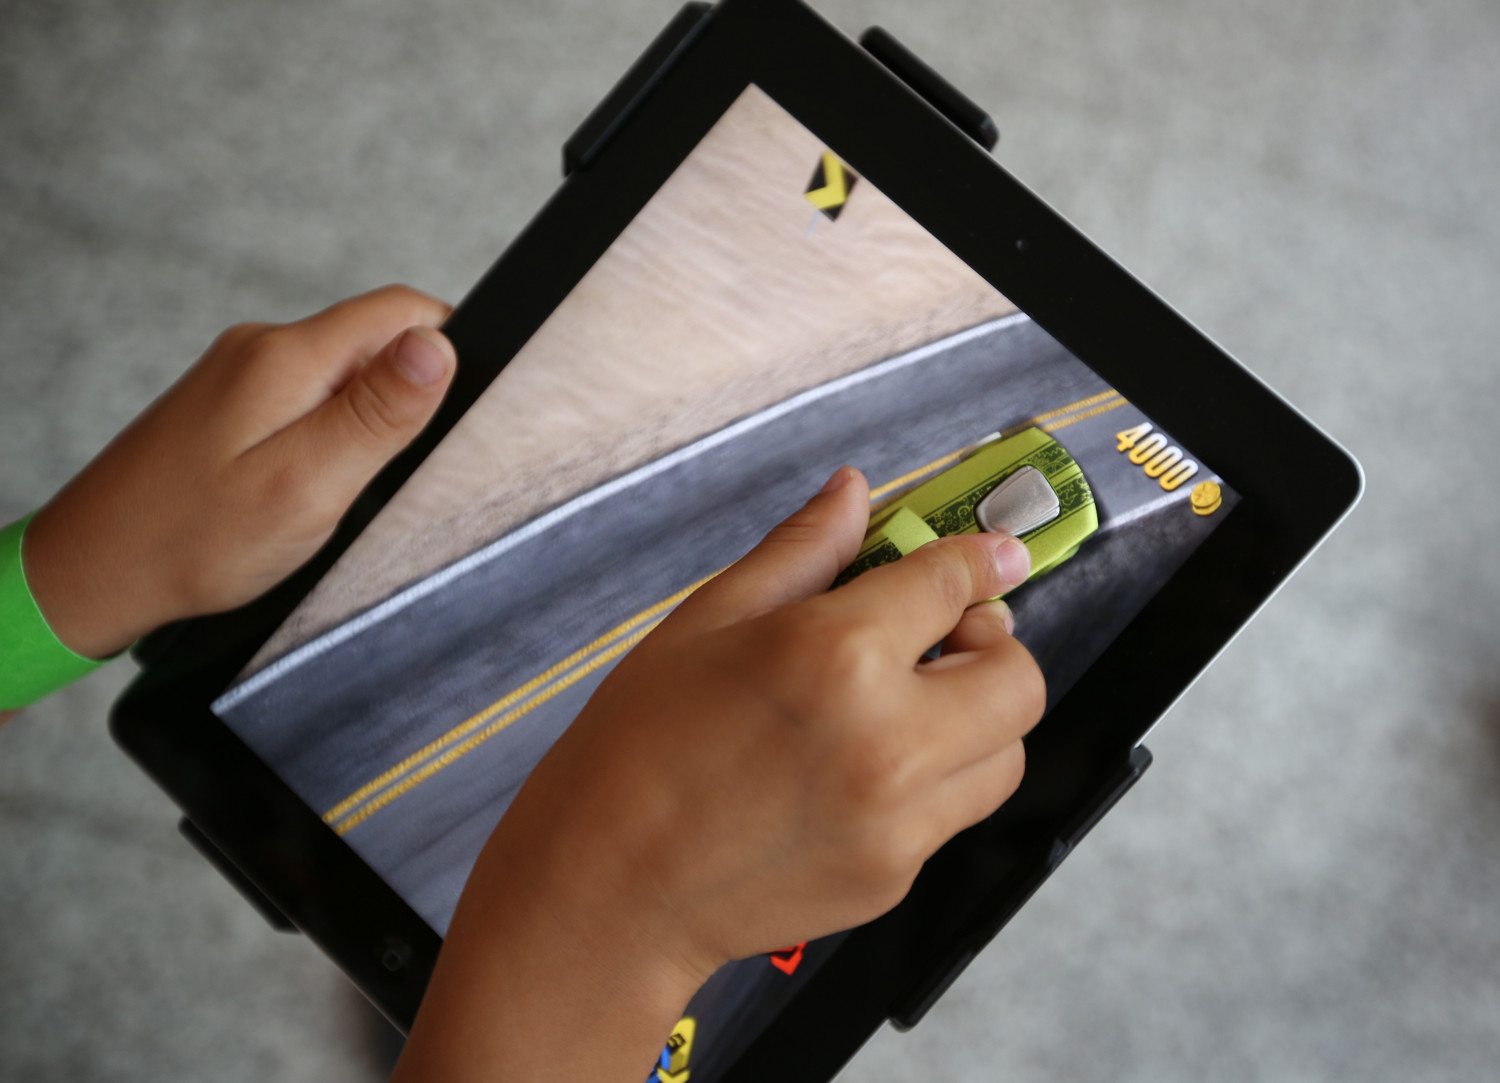 Mattel Launch Their New Apptivity Toys That Interact With iPads